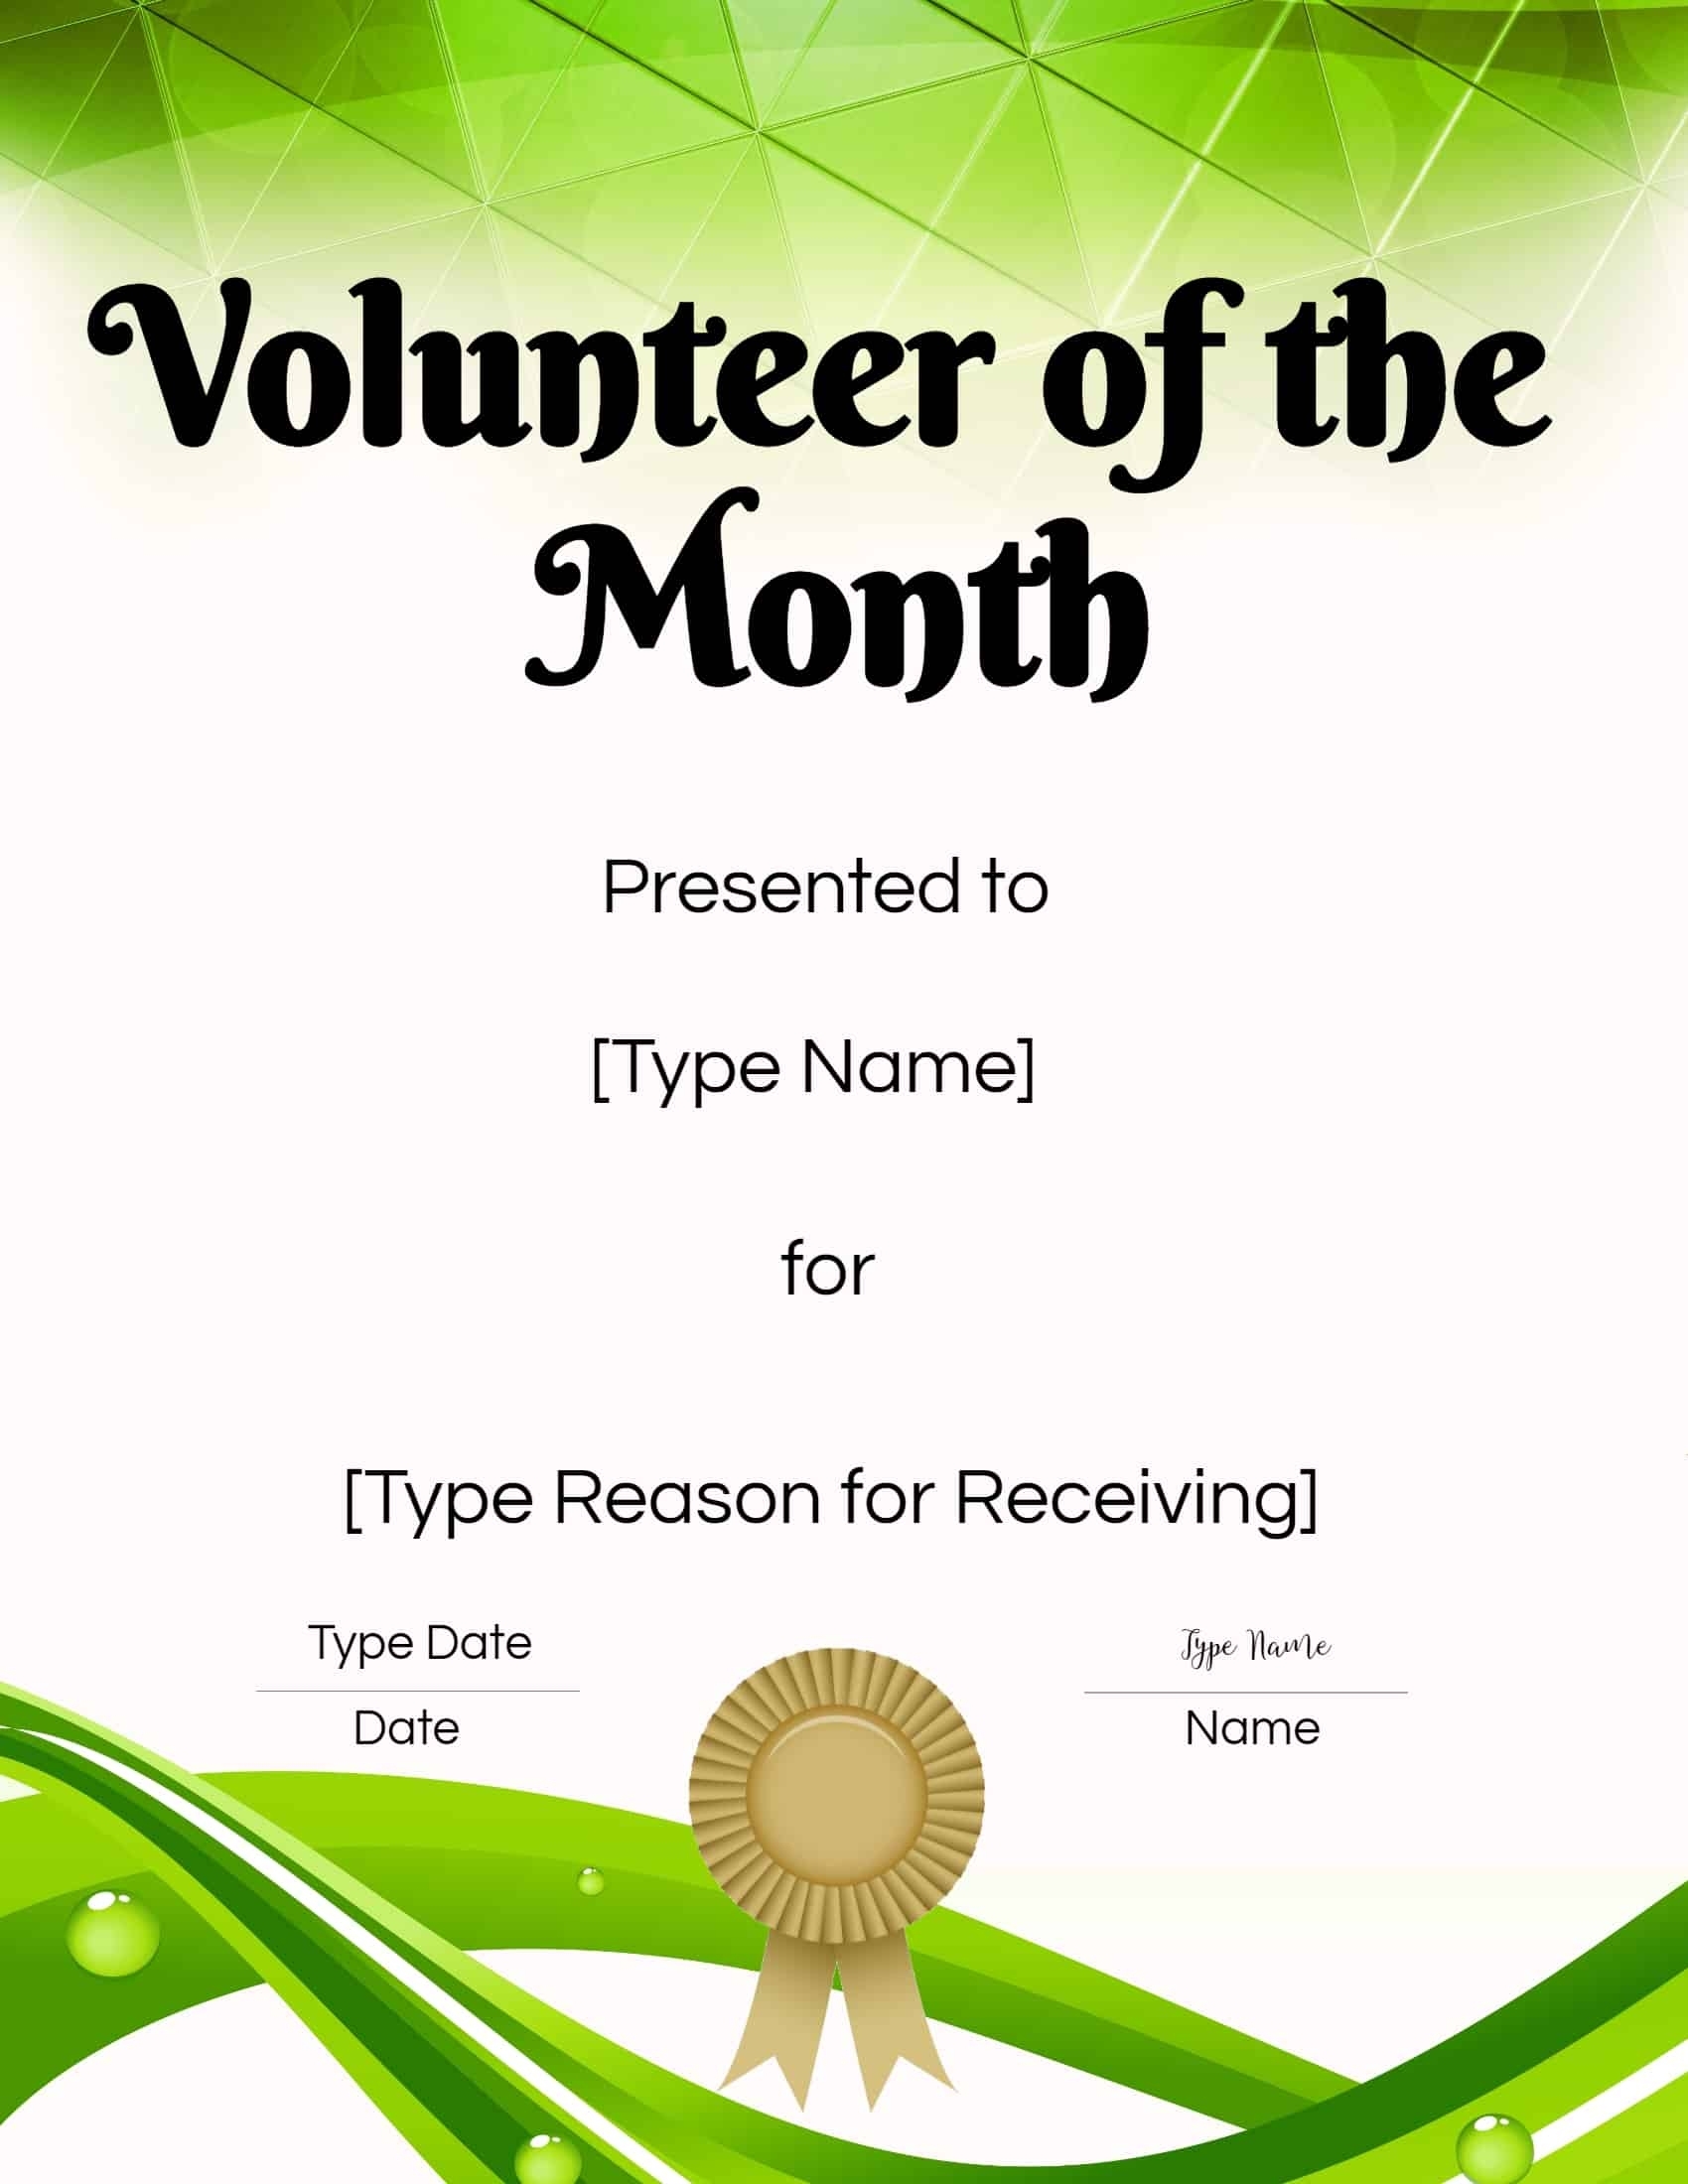 Free Volunteer Certificate Template | Many Designs Are Available With Regard To Volunteer Award Certificate Template